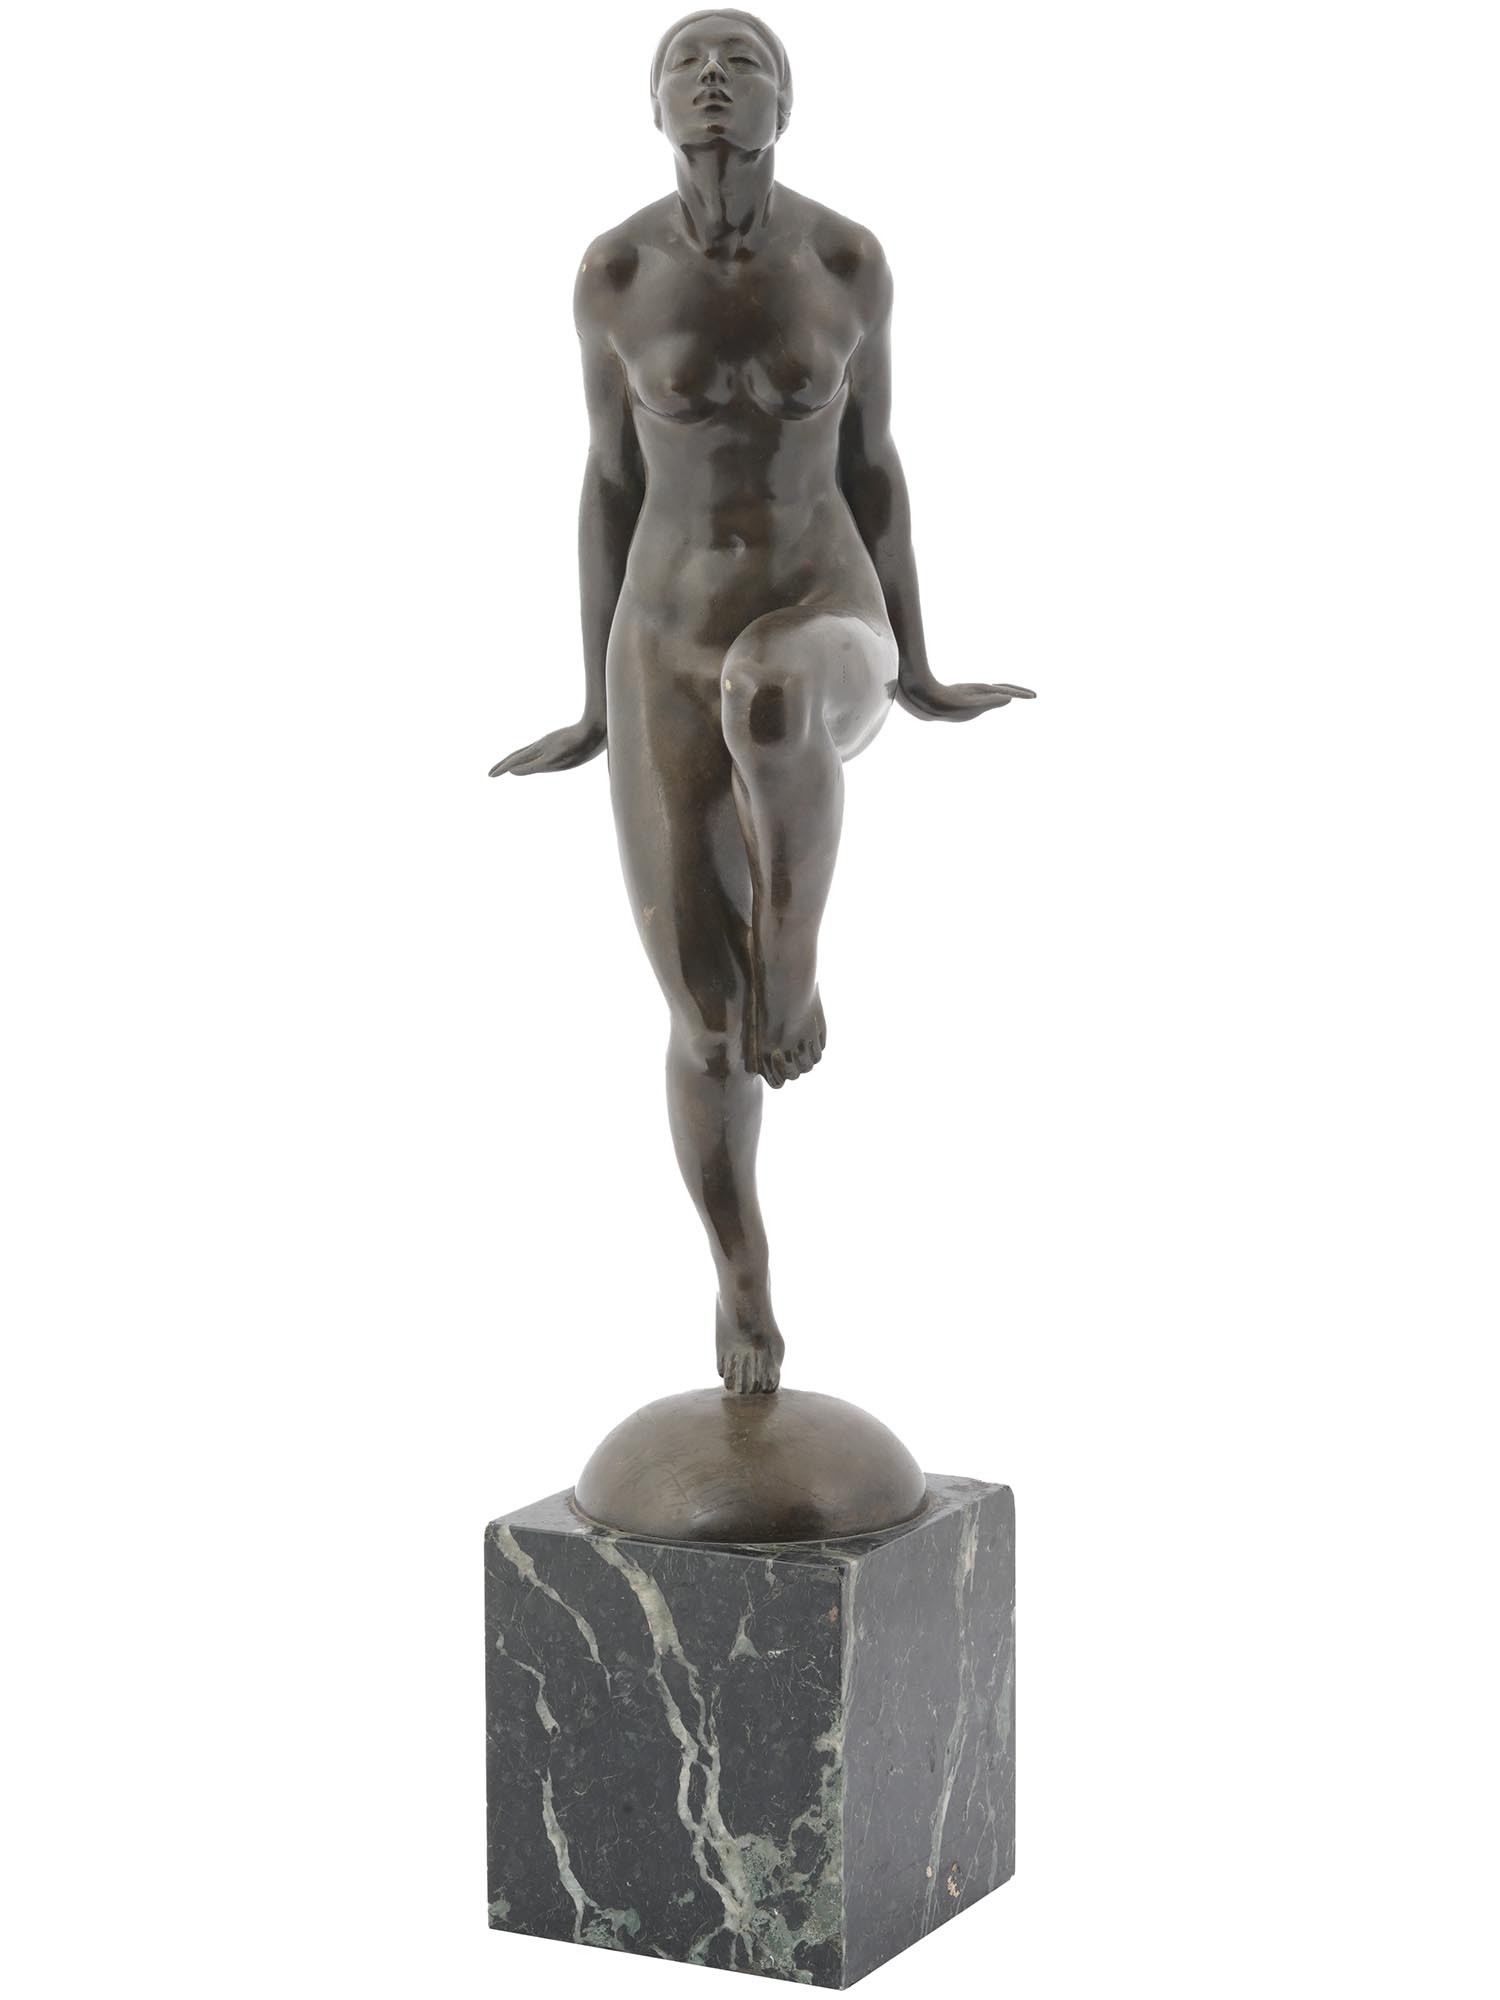 FRENCH ART DECO BRONZE SCULPTURE BY EMILE A LEROY PIC-1